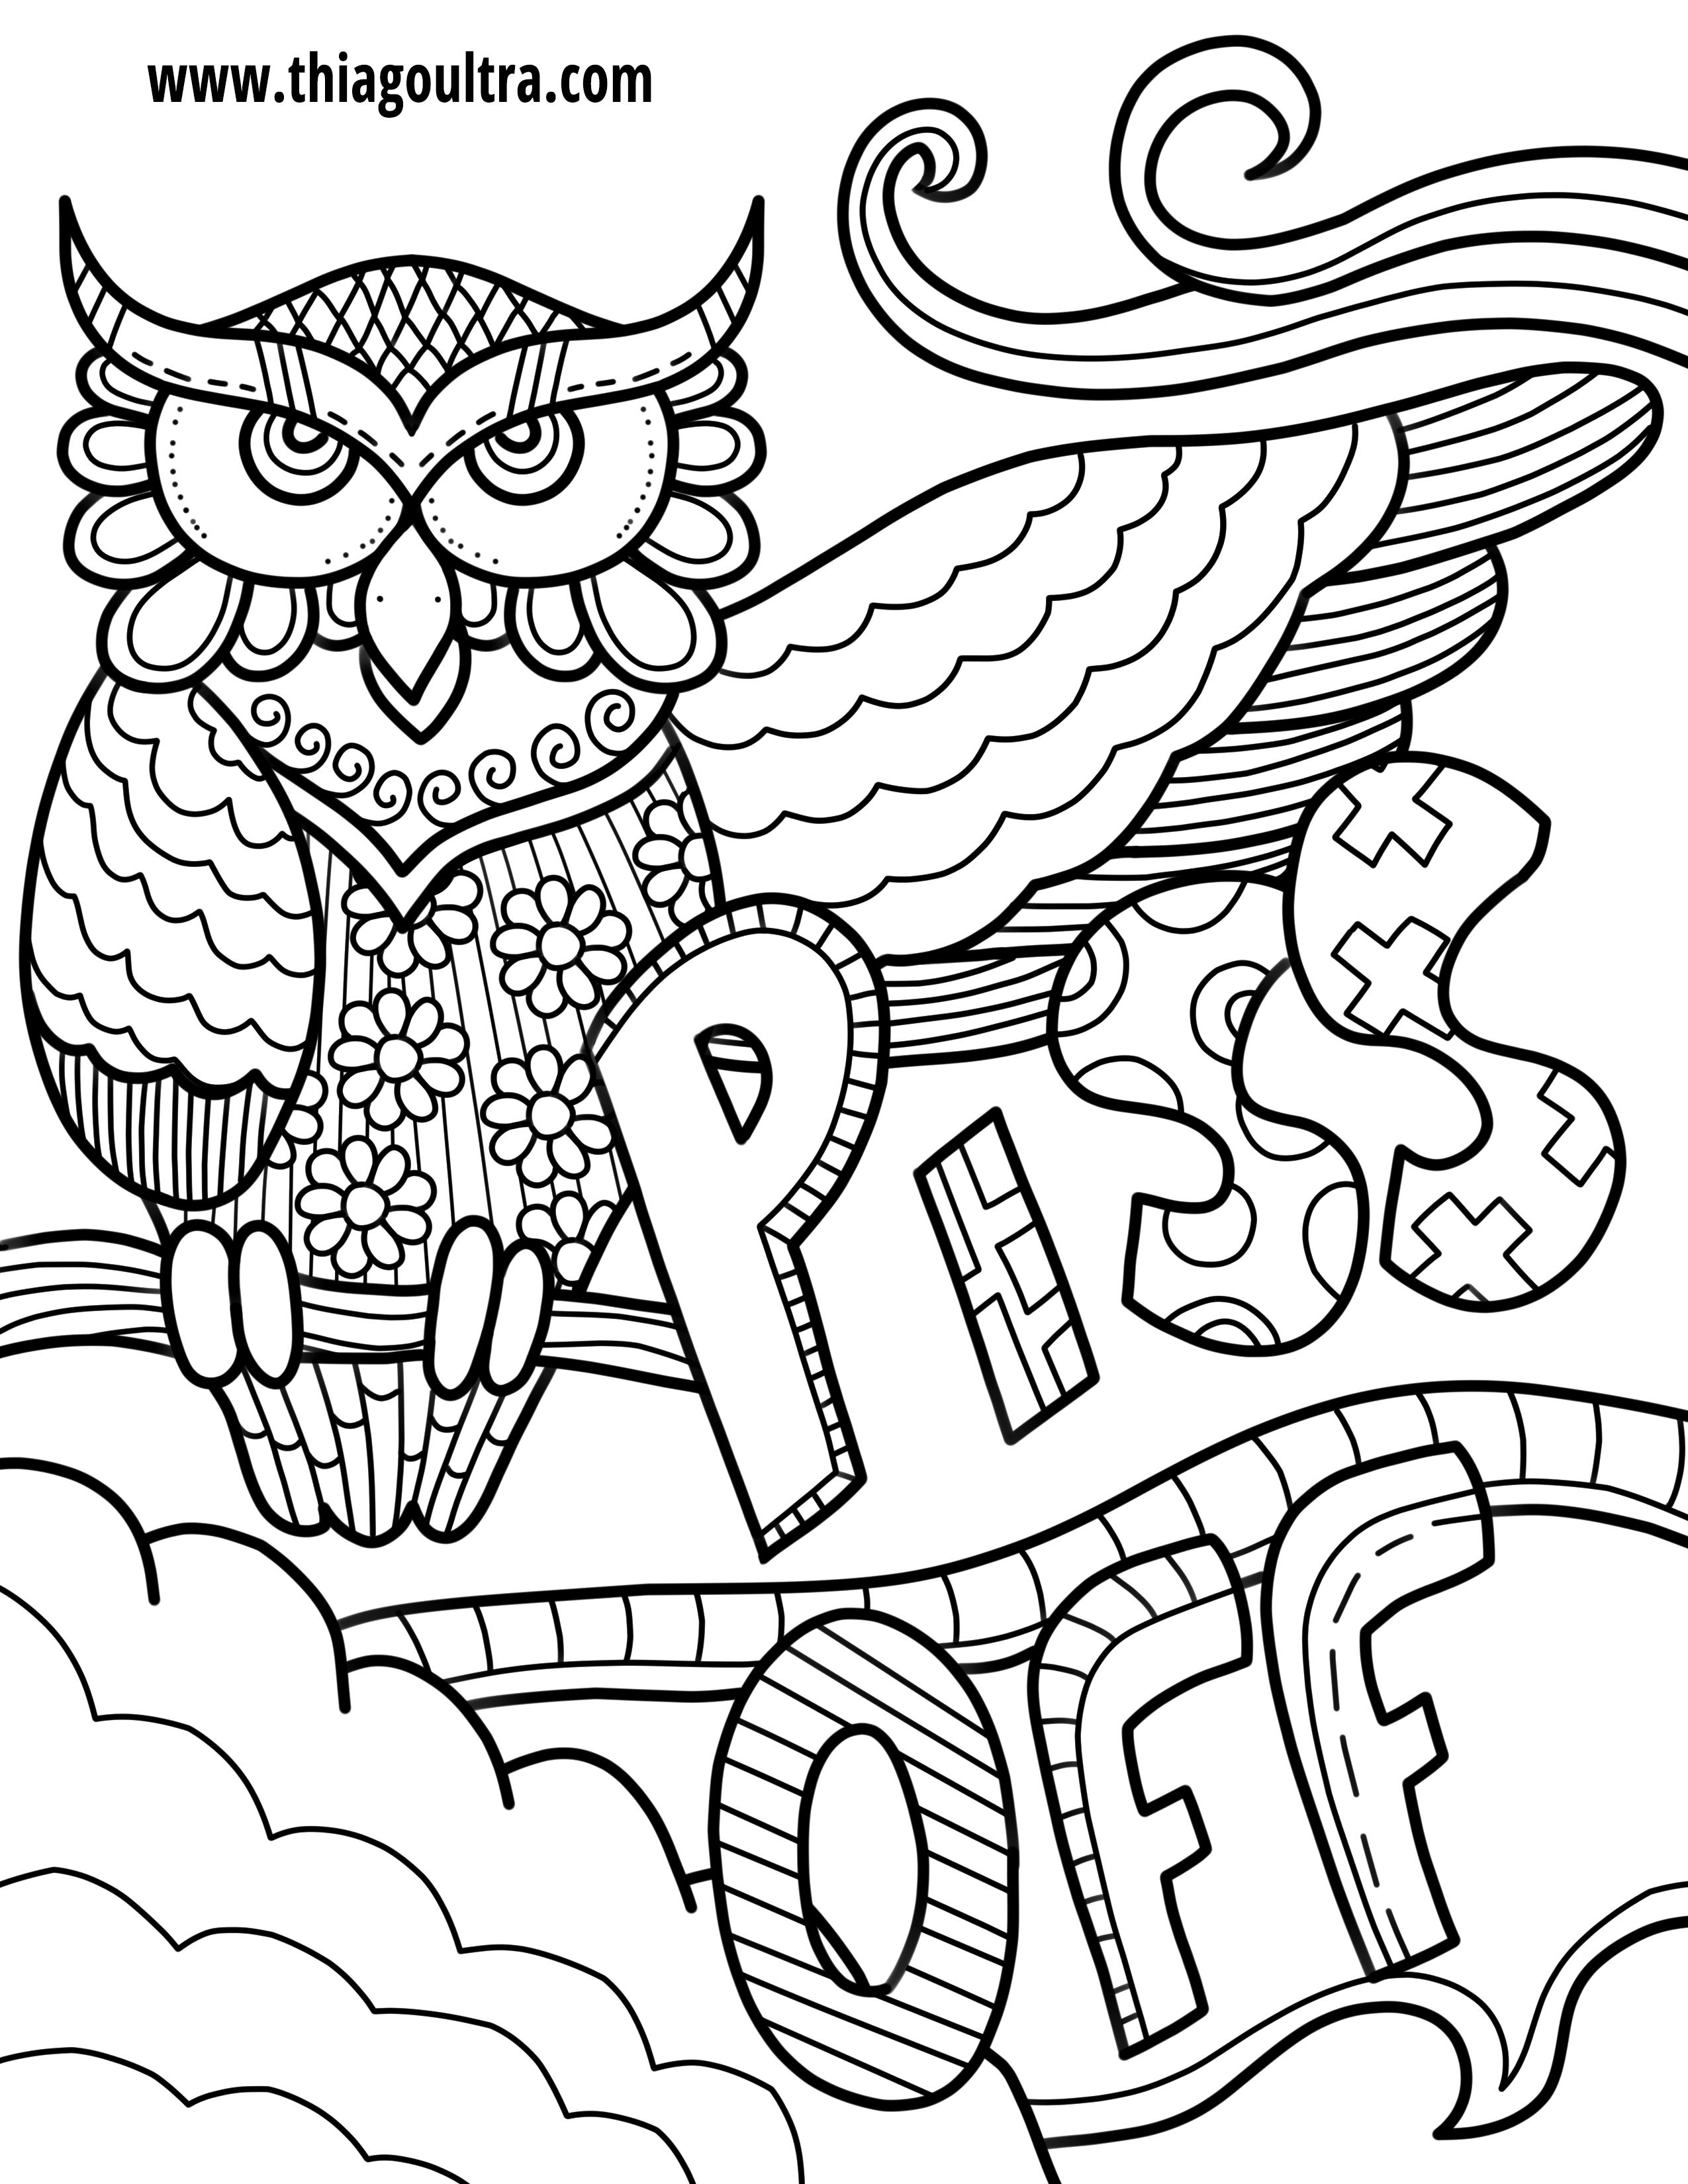 Challenge Free Printable Coloring Pages For Adults Only Swear Words - Free Printable Coloring Pages For Adults Swear Words